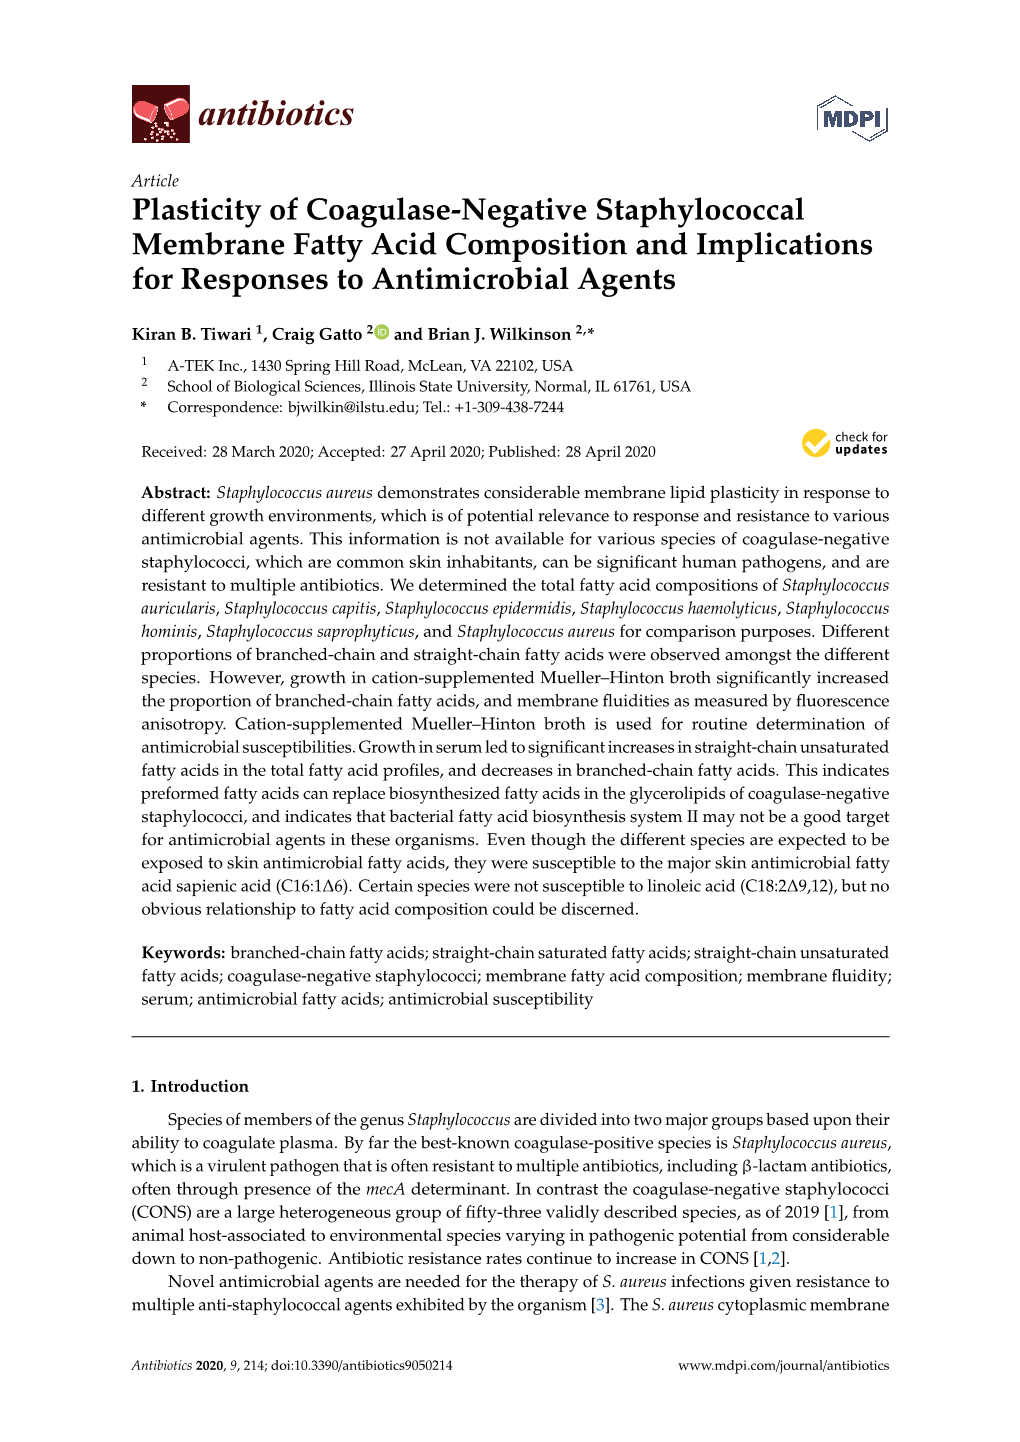 Plasticity of Coagulase-Negative Staphylococcal Membrane Fatty Acid Composition and Implications for Responses to Antimicrobial Agents